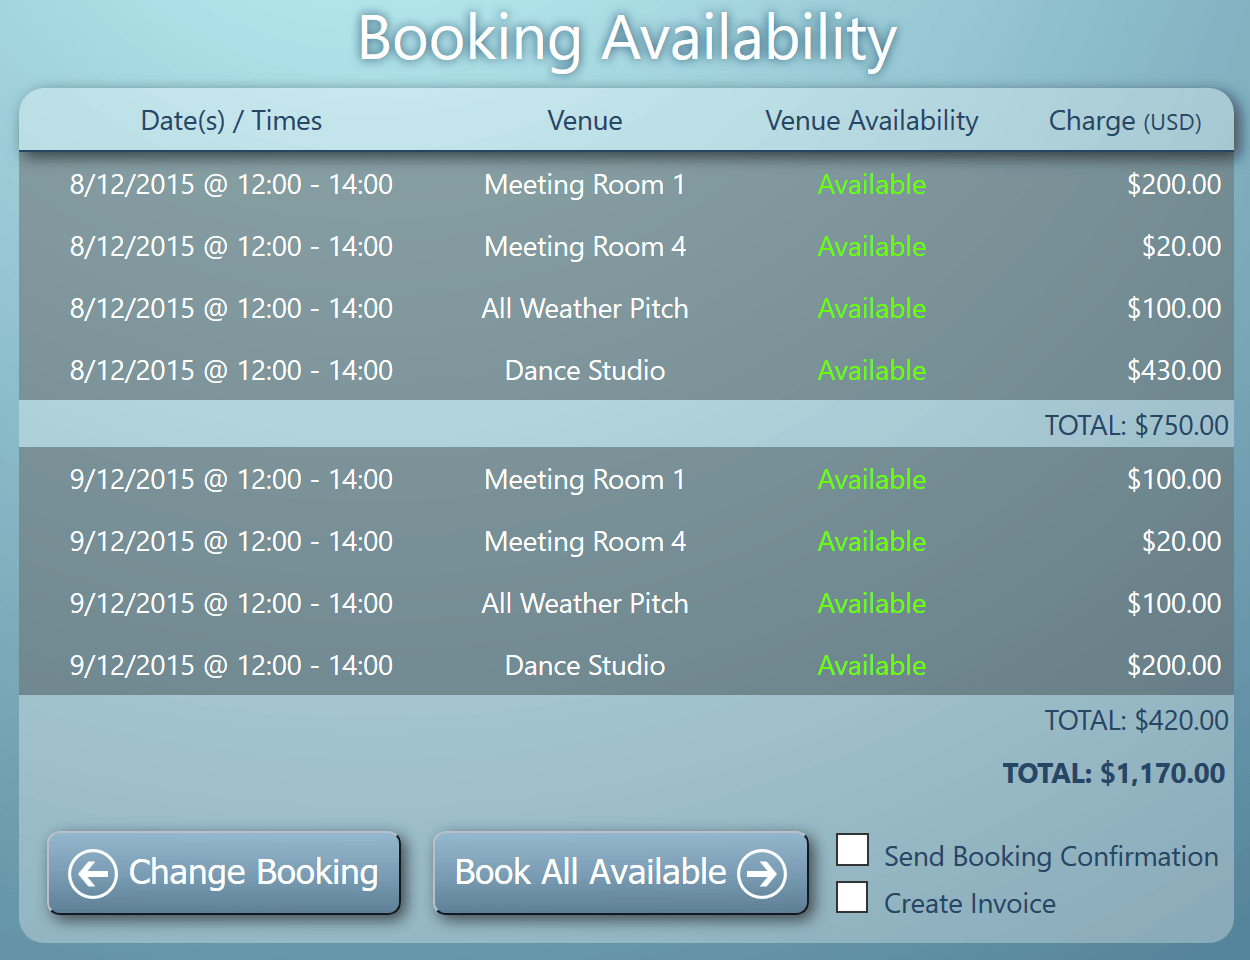 Indicate hire charges directly on the Booking Availability screen